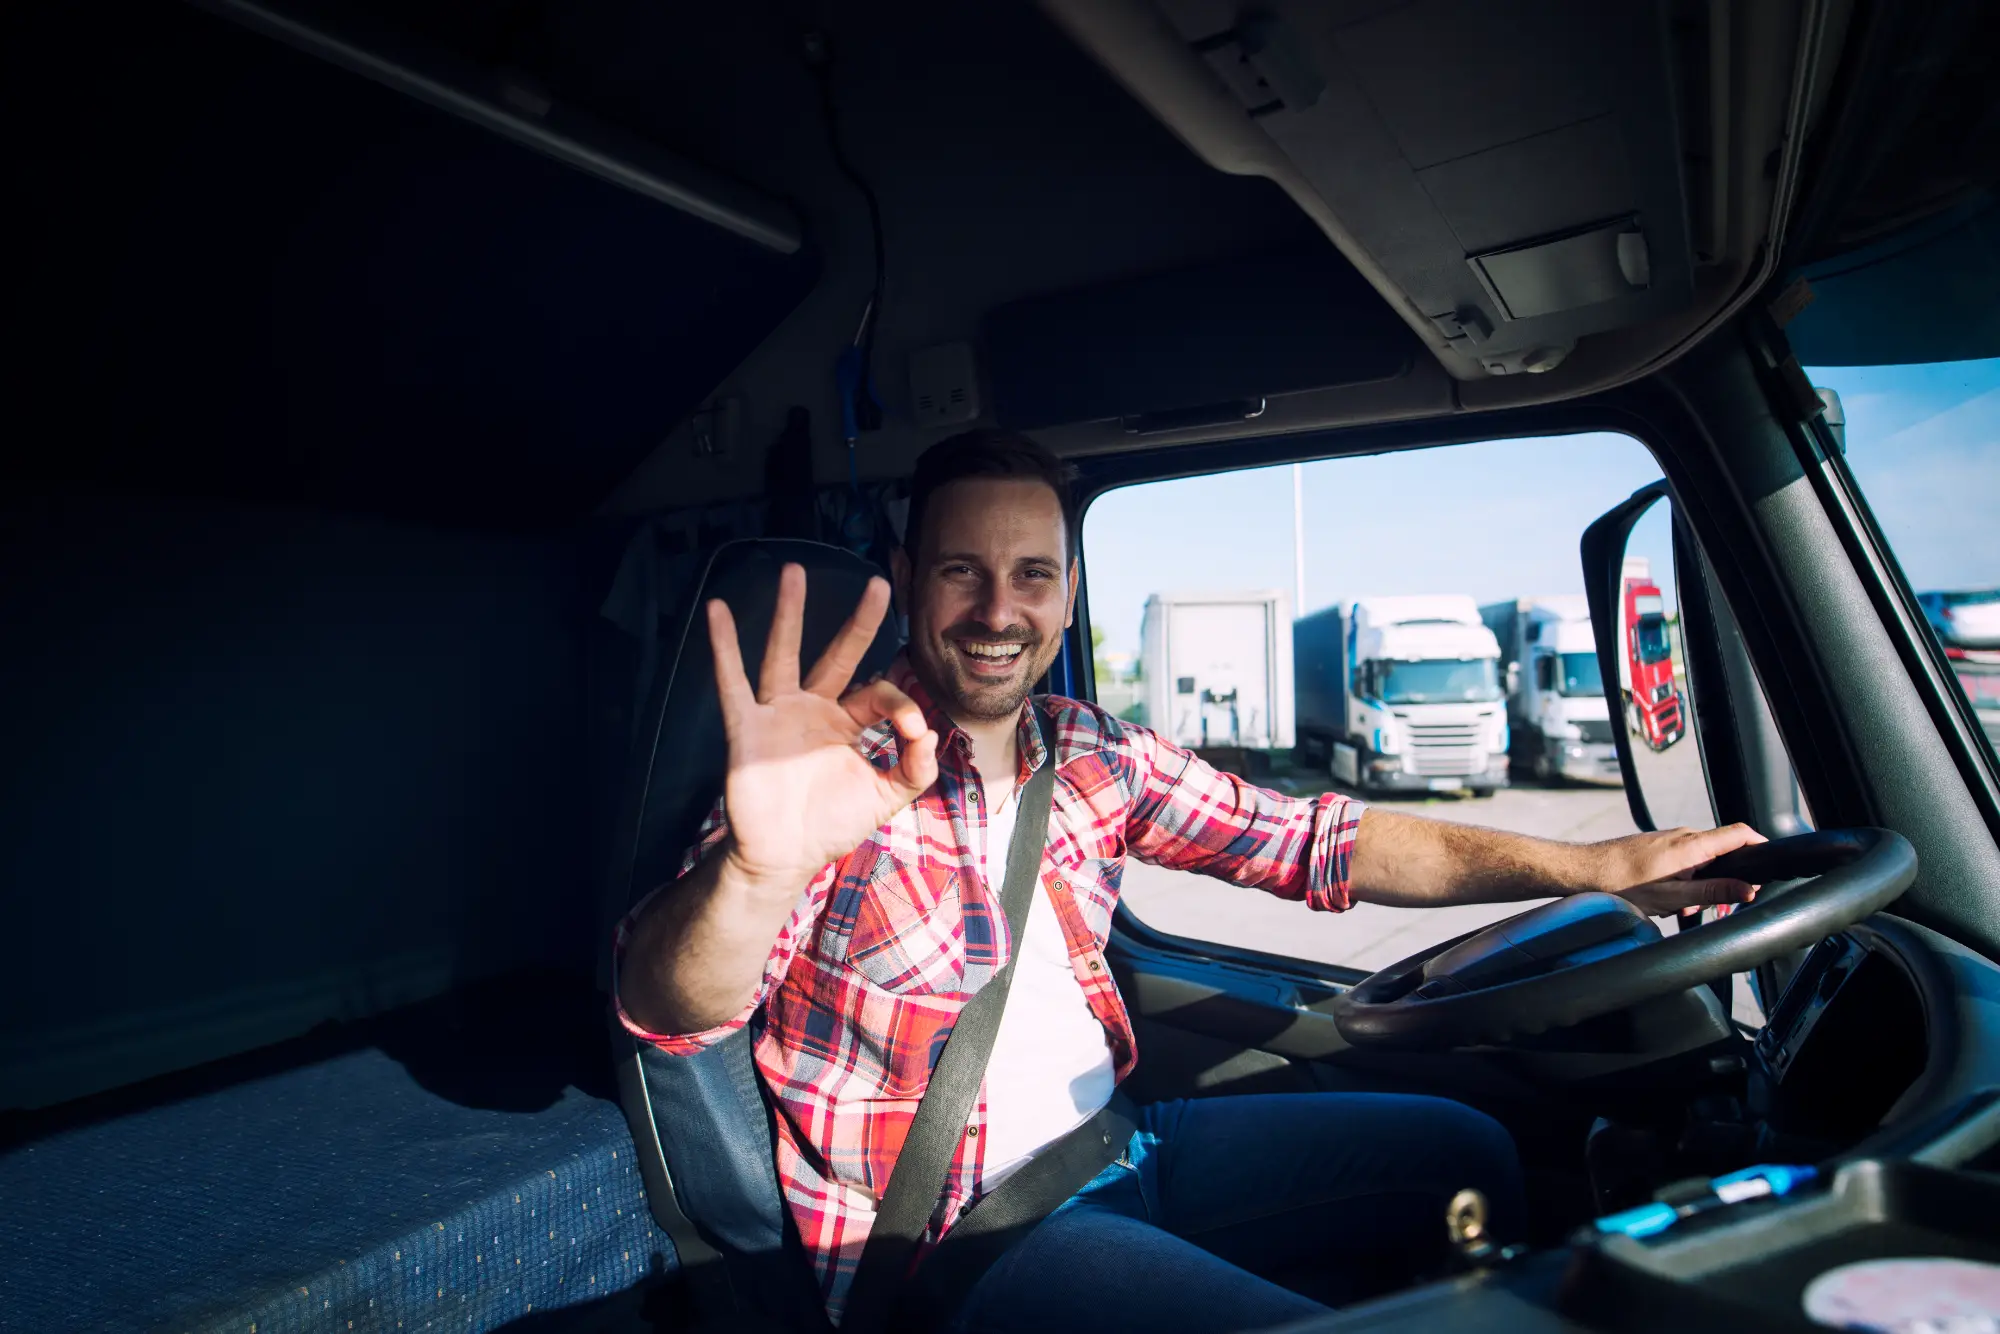 truck-driver-loving-his-job-showing-okay-gesture-sign-while-sitting-his-truck-cabin